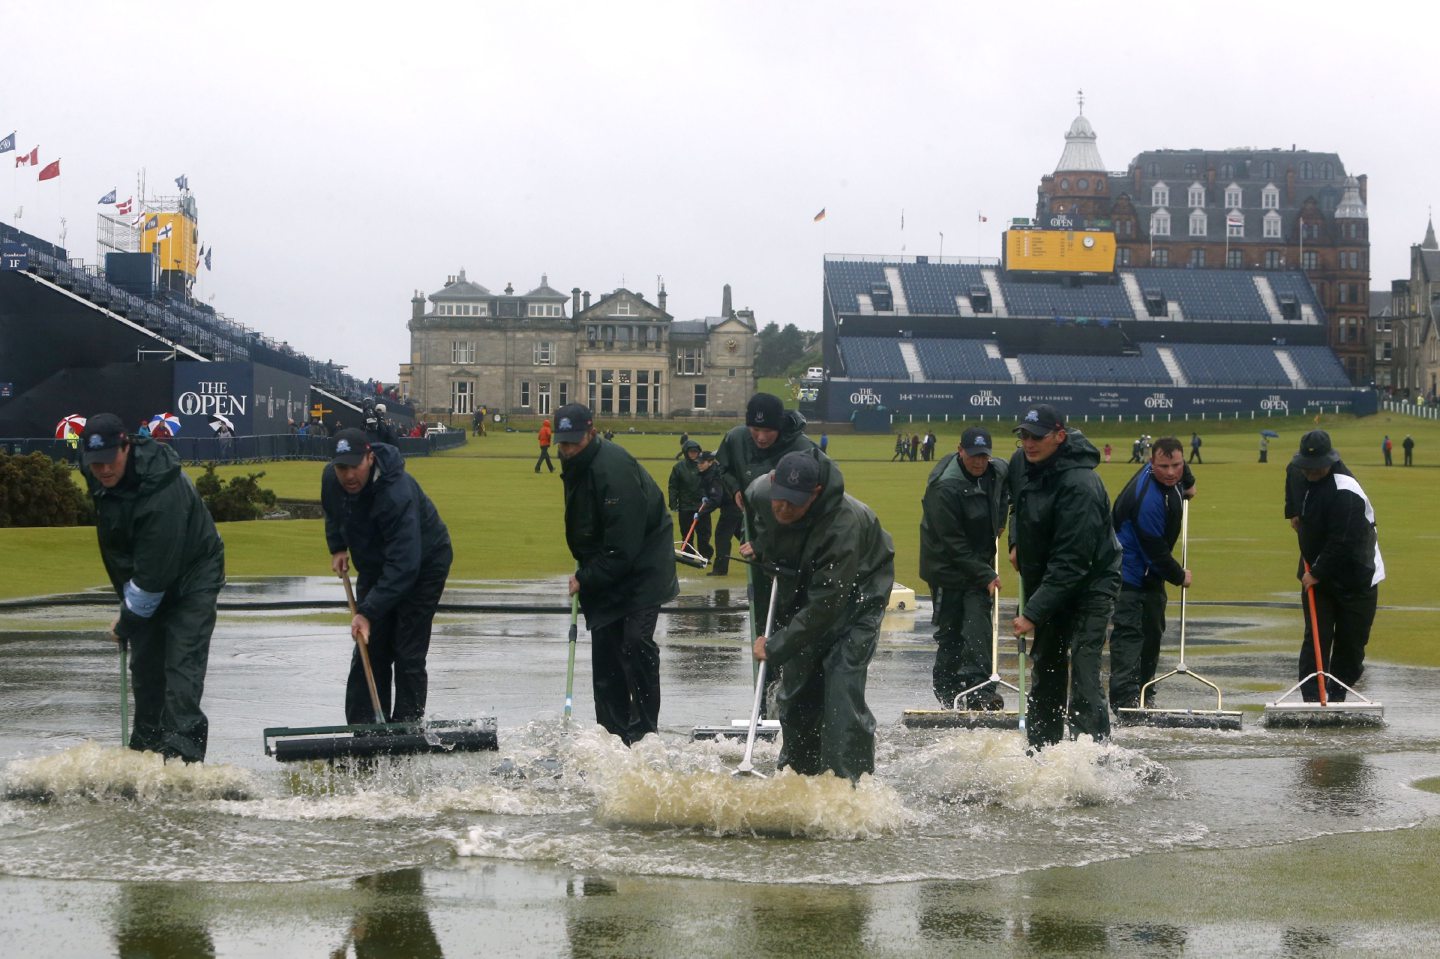 Course officials clear standing water as rain suspends play during day two of The Open Championship 2015 at St Andrews, Fife